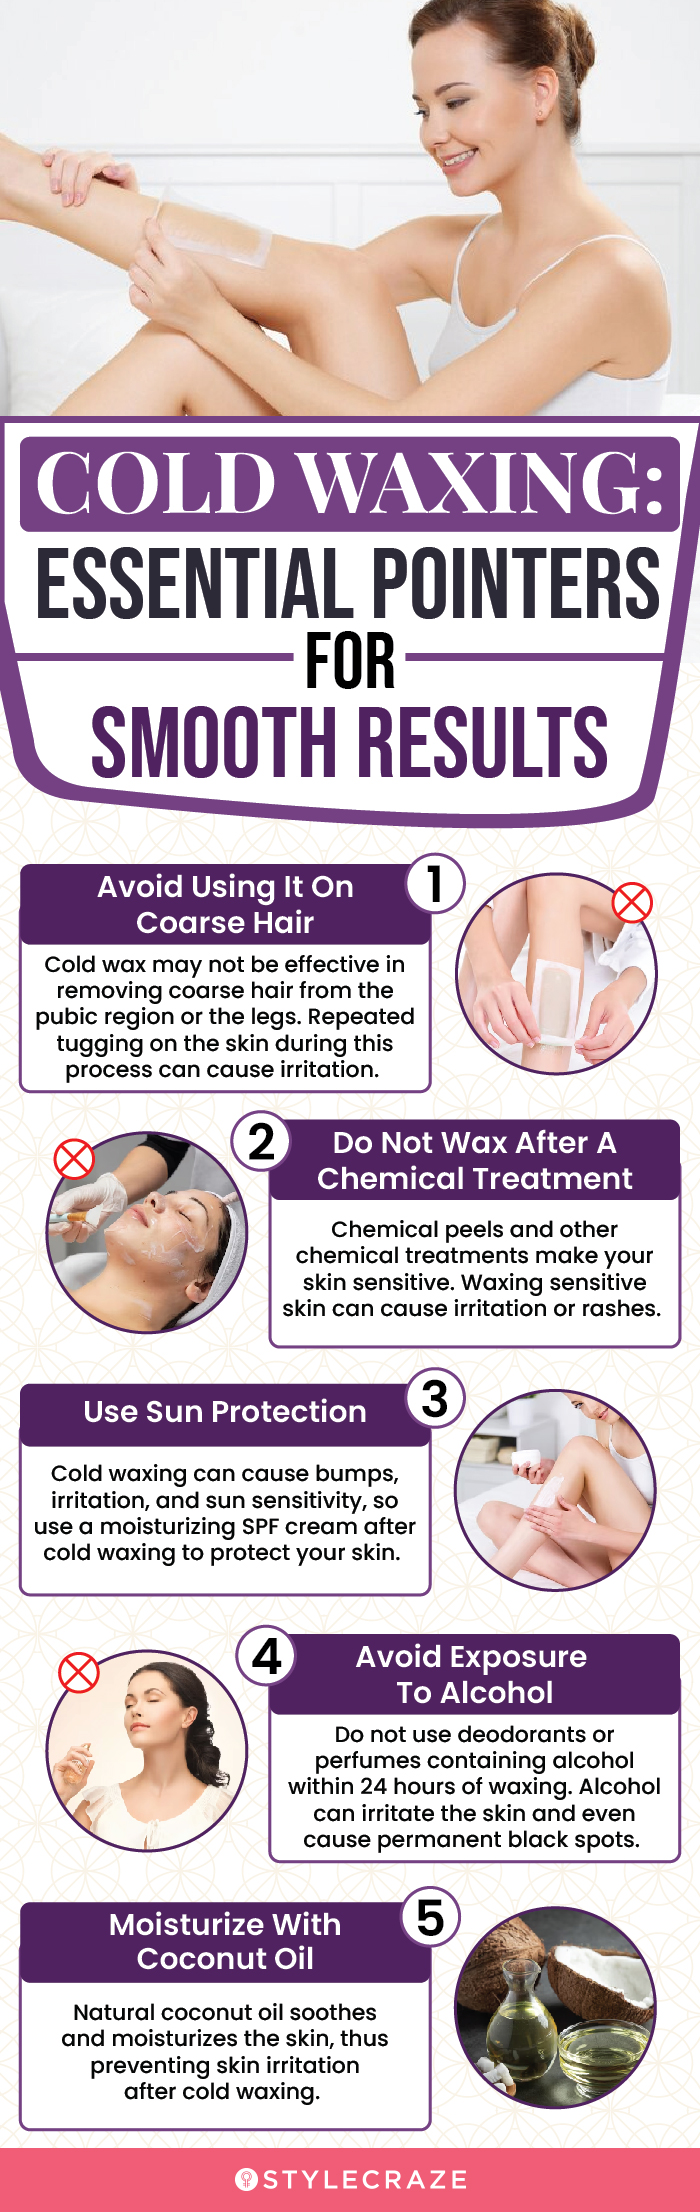 cold waxing essential pointers for smooth results (infographic)